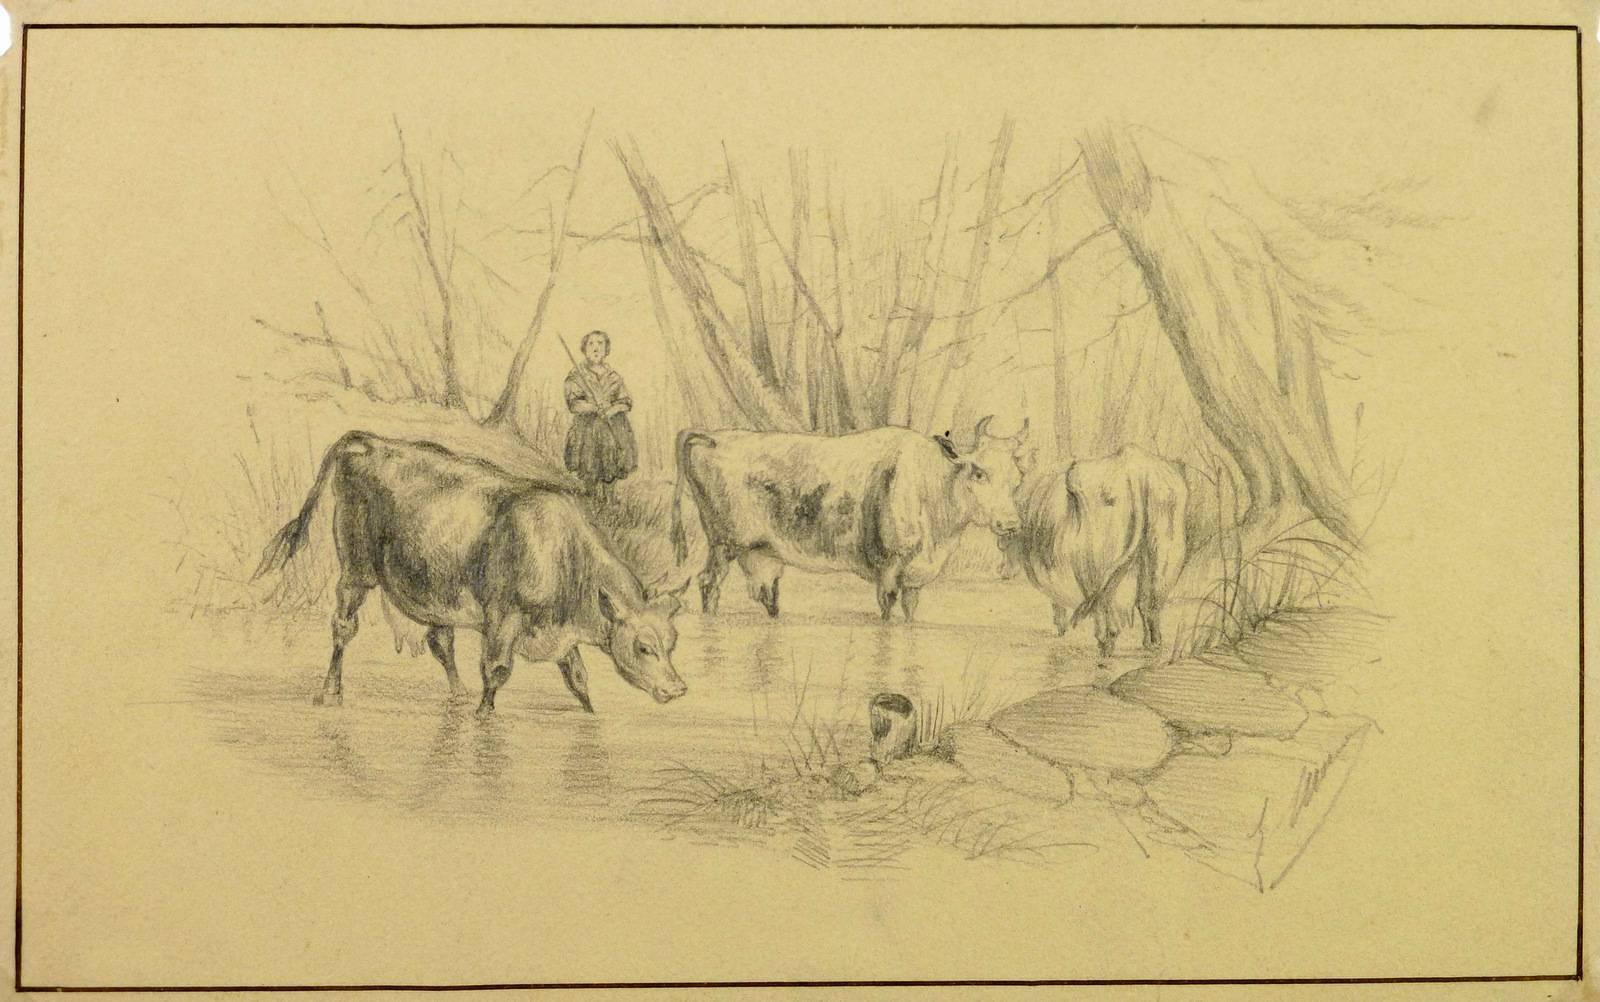 Unknown Animal Art - Watering Hole Drawing